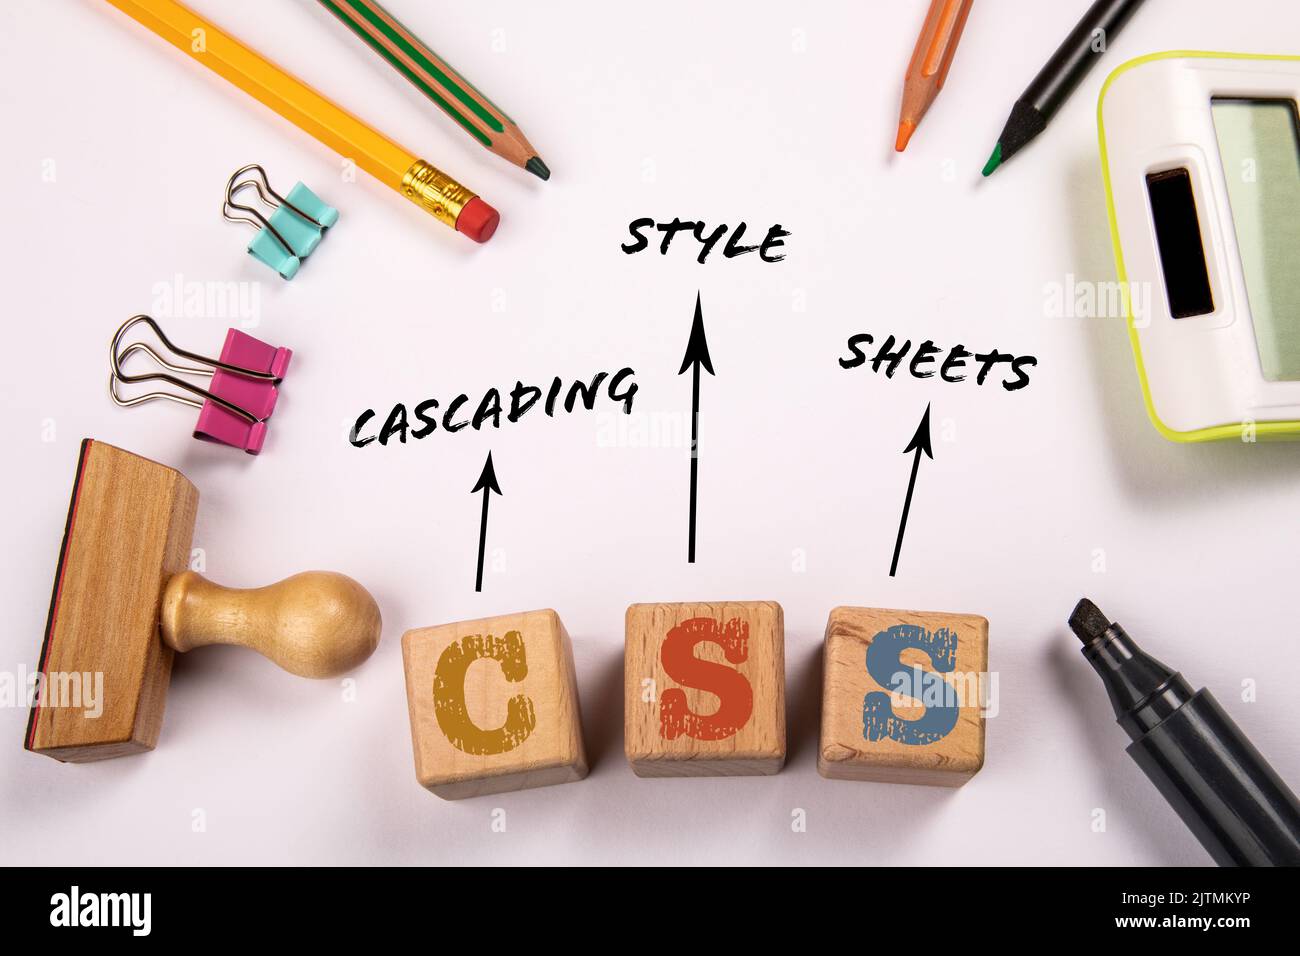 CSS - Cascading Style Sheets. Text on a white office table. Stock Photo